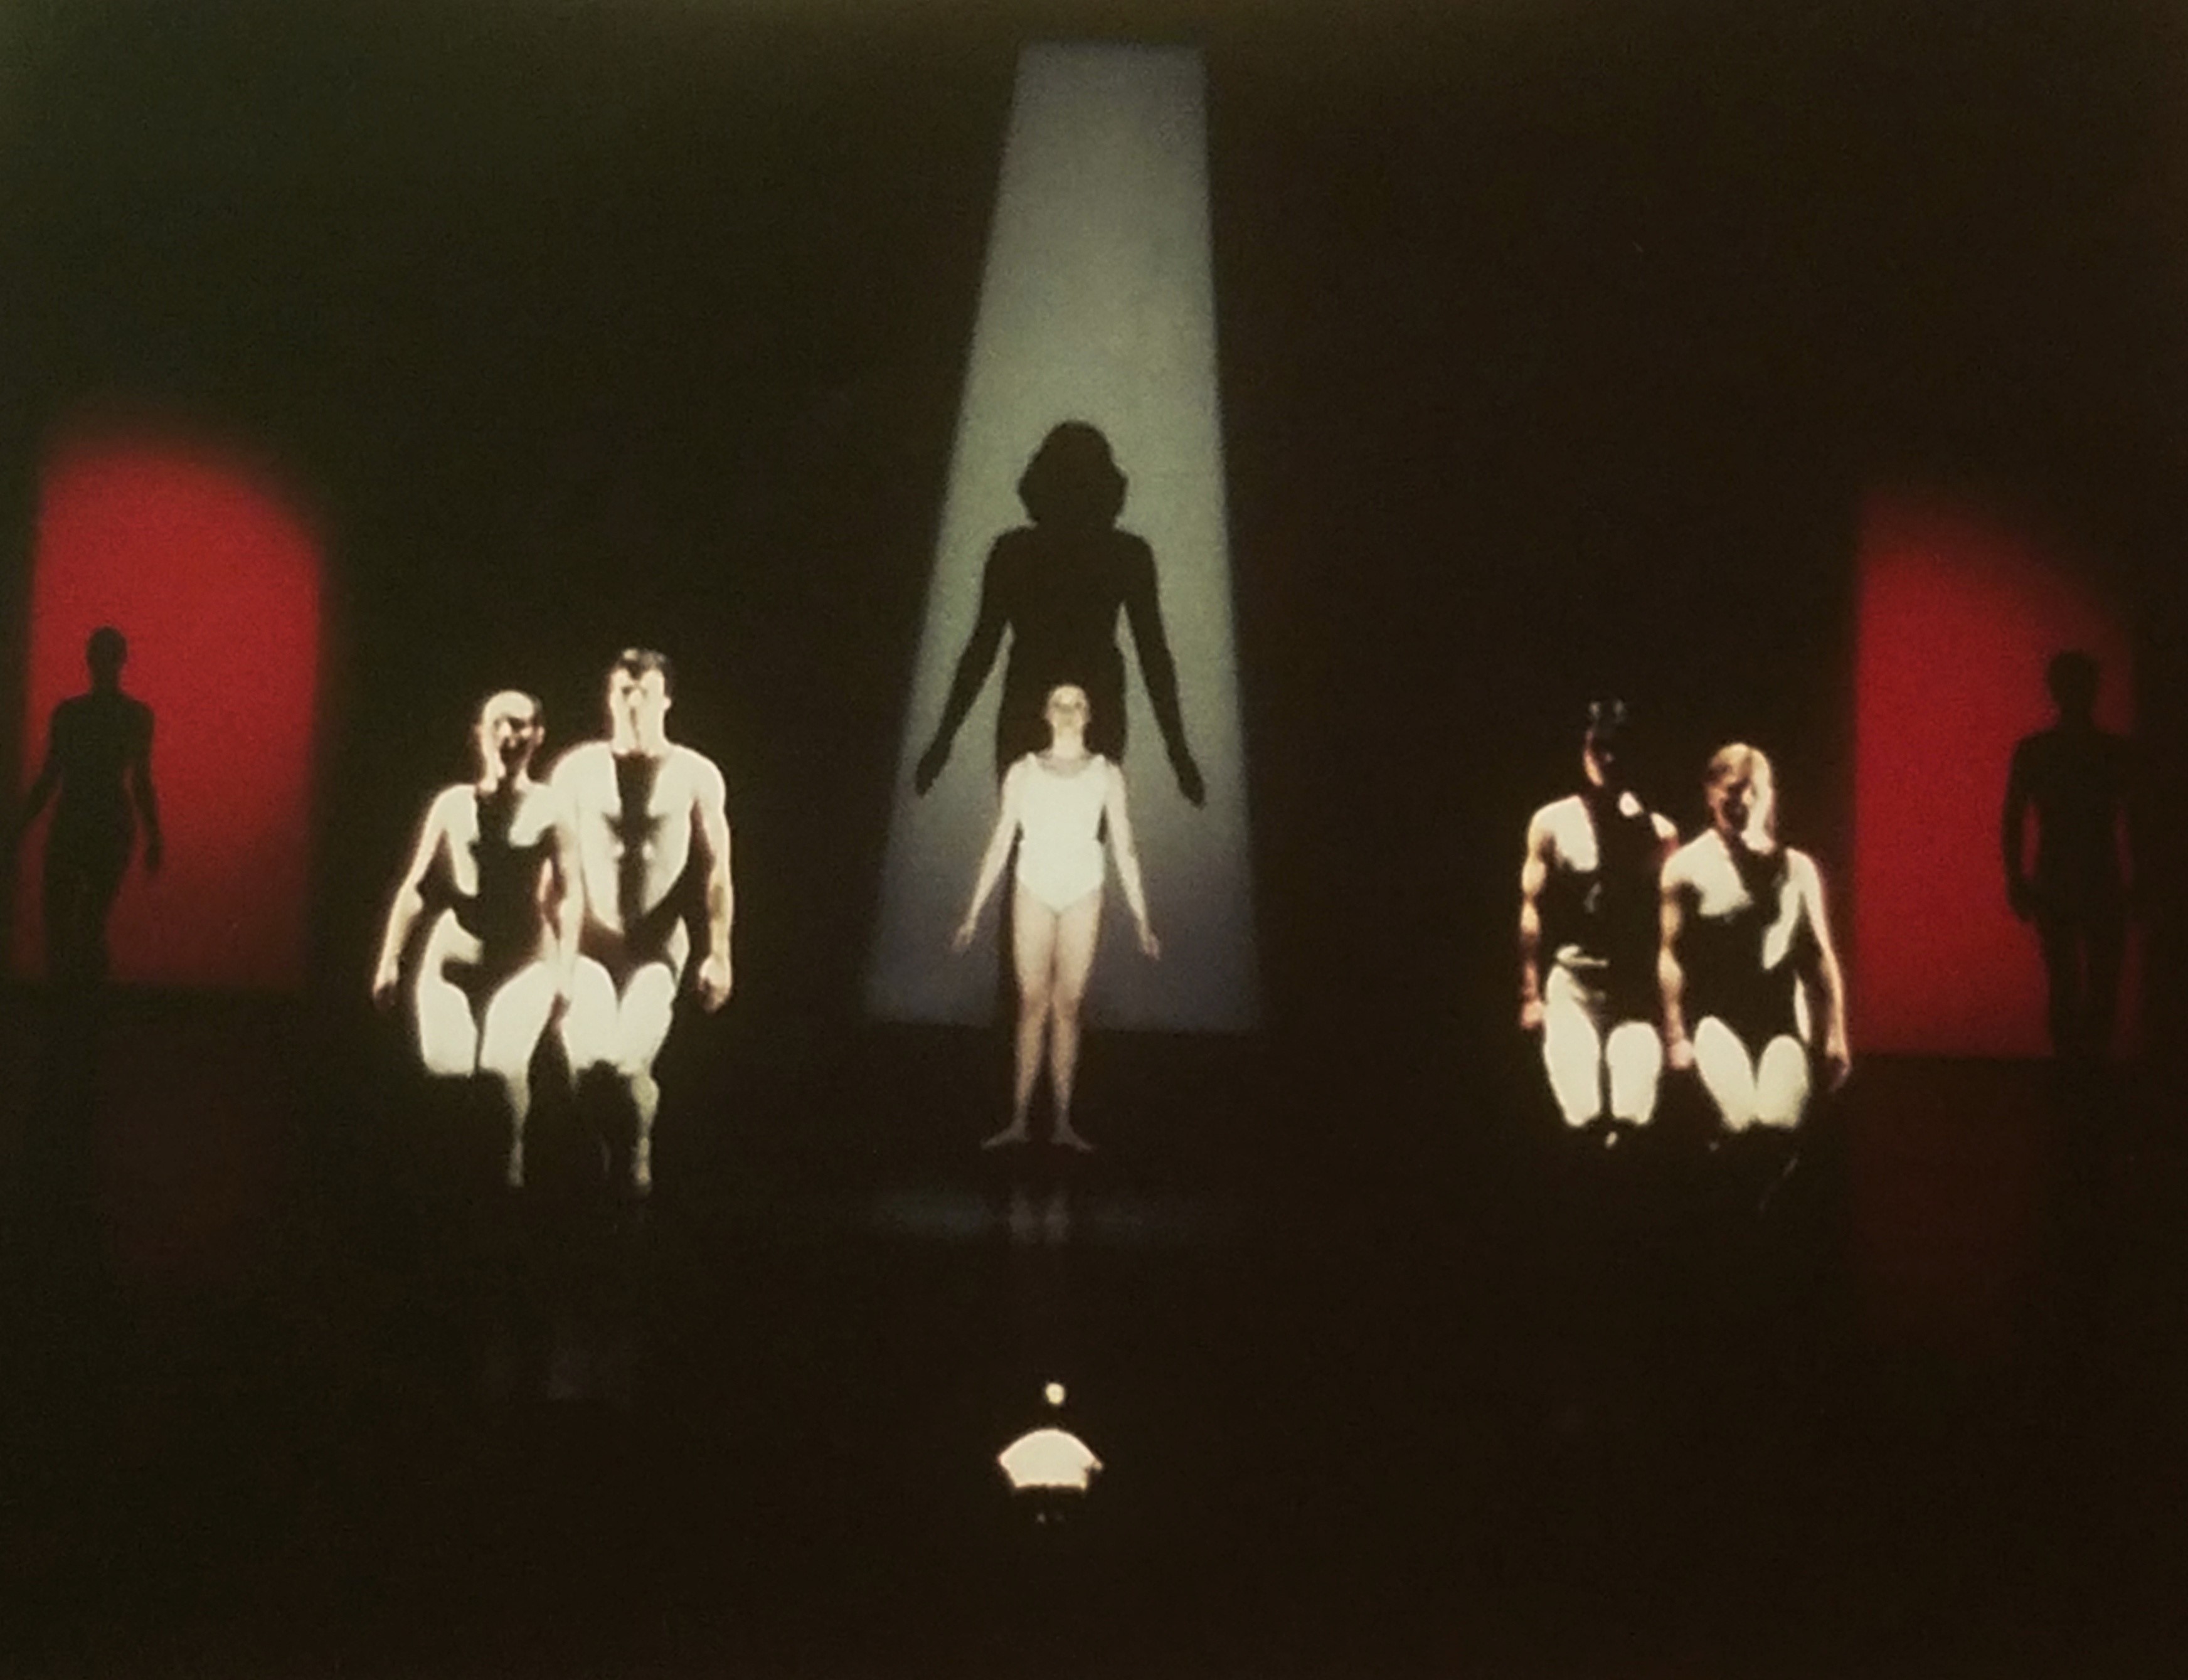 An archival photo from the original Mimi Garrard Dance Theatre production of Arc in May of 1977 which featured a portable computer-controlled lighting system by Mimi Ganard and James Seawright and an electronic musical score by Daria Semegen. (Photo courtesy Daria Semegen.) 